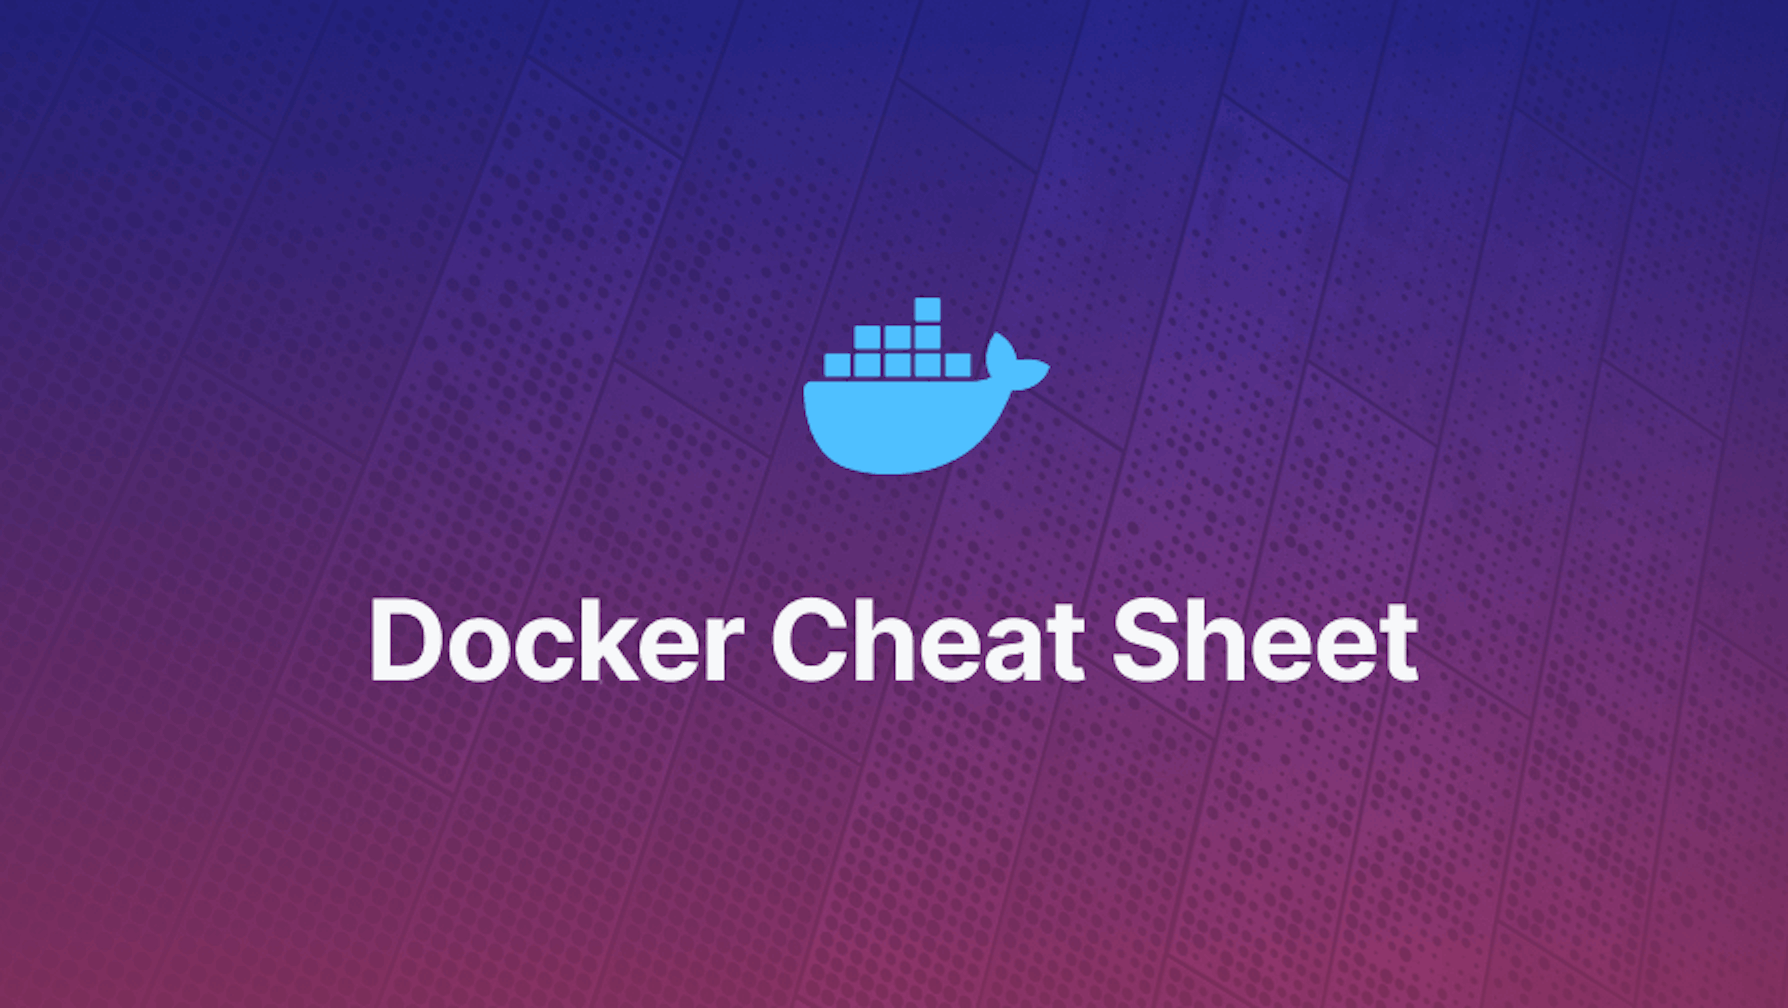 Docker Cheat Sheet - Most Commonly Used Commands